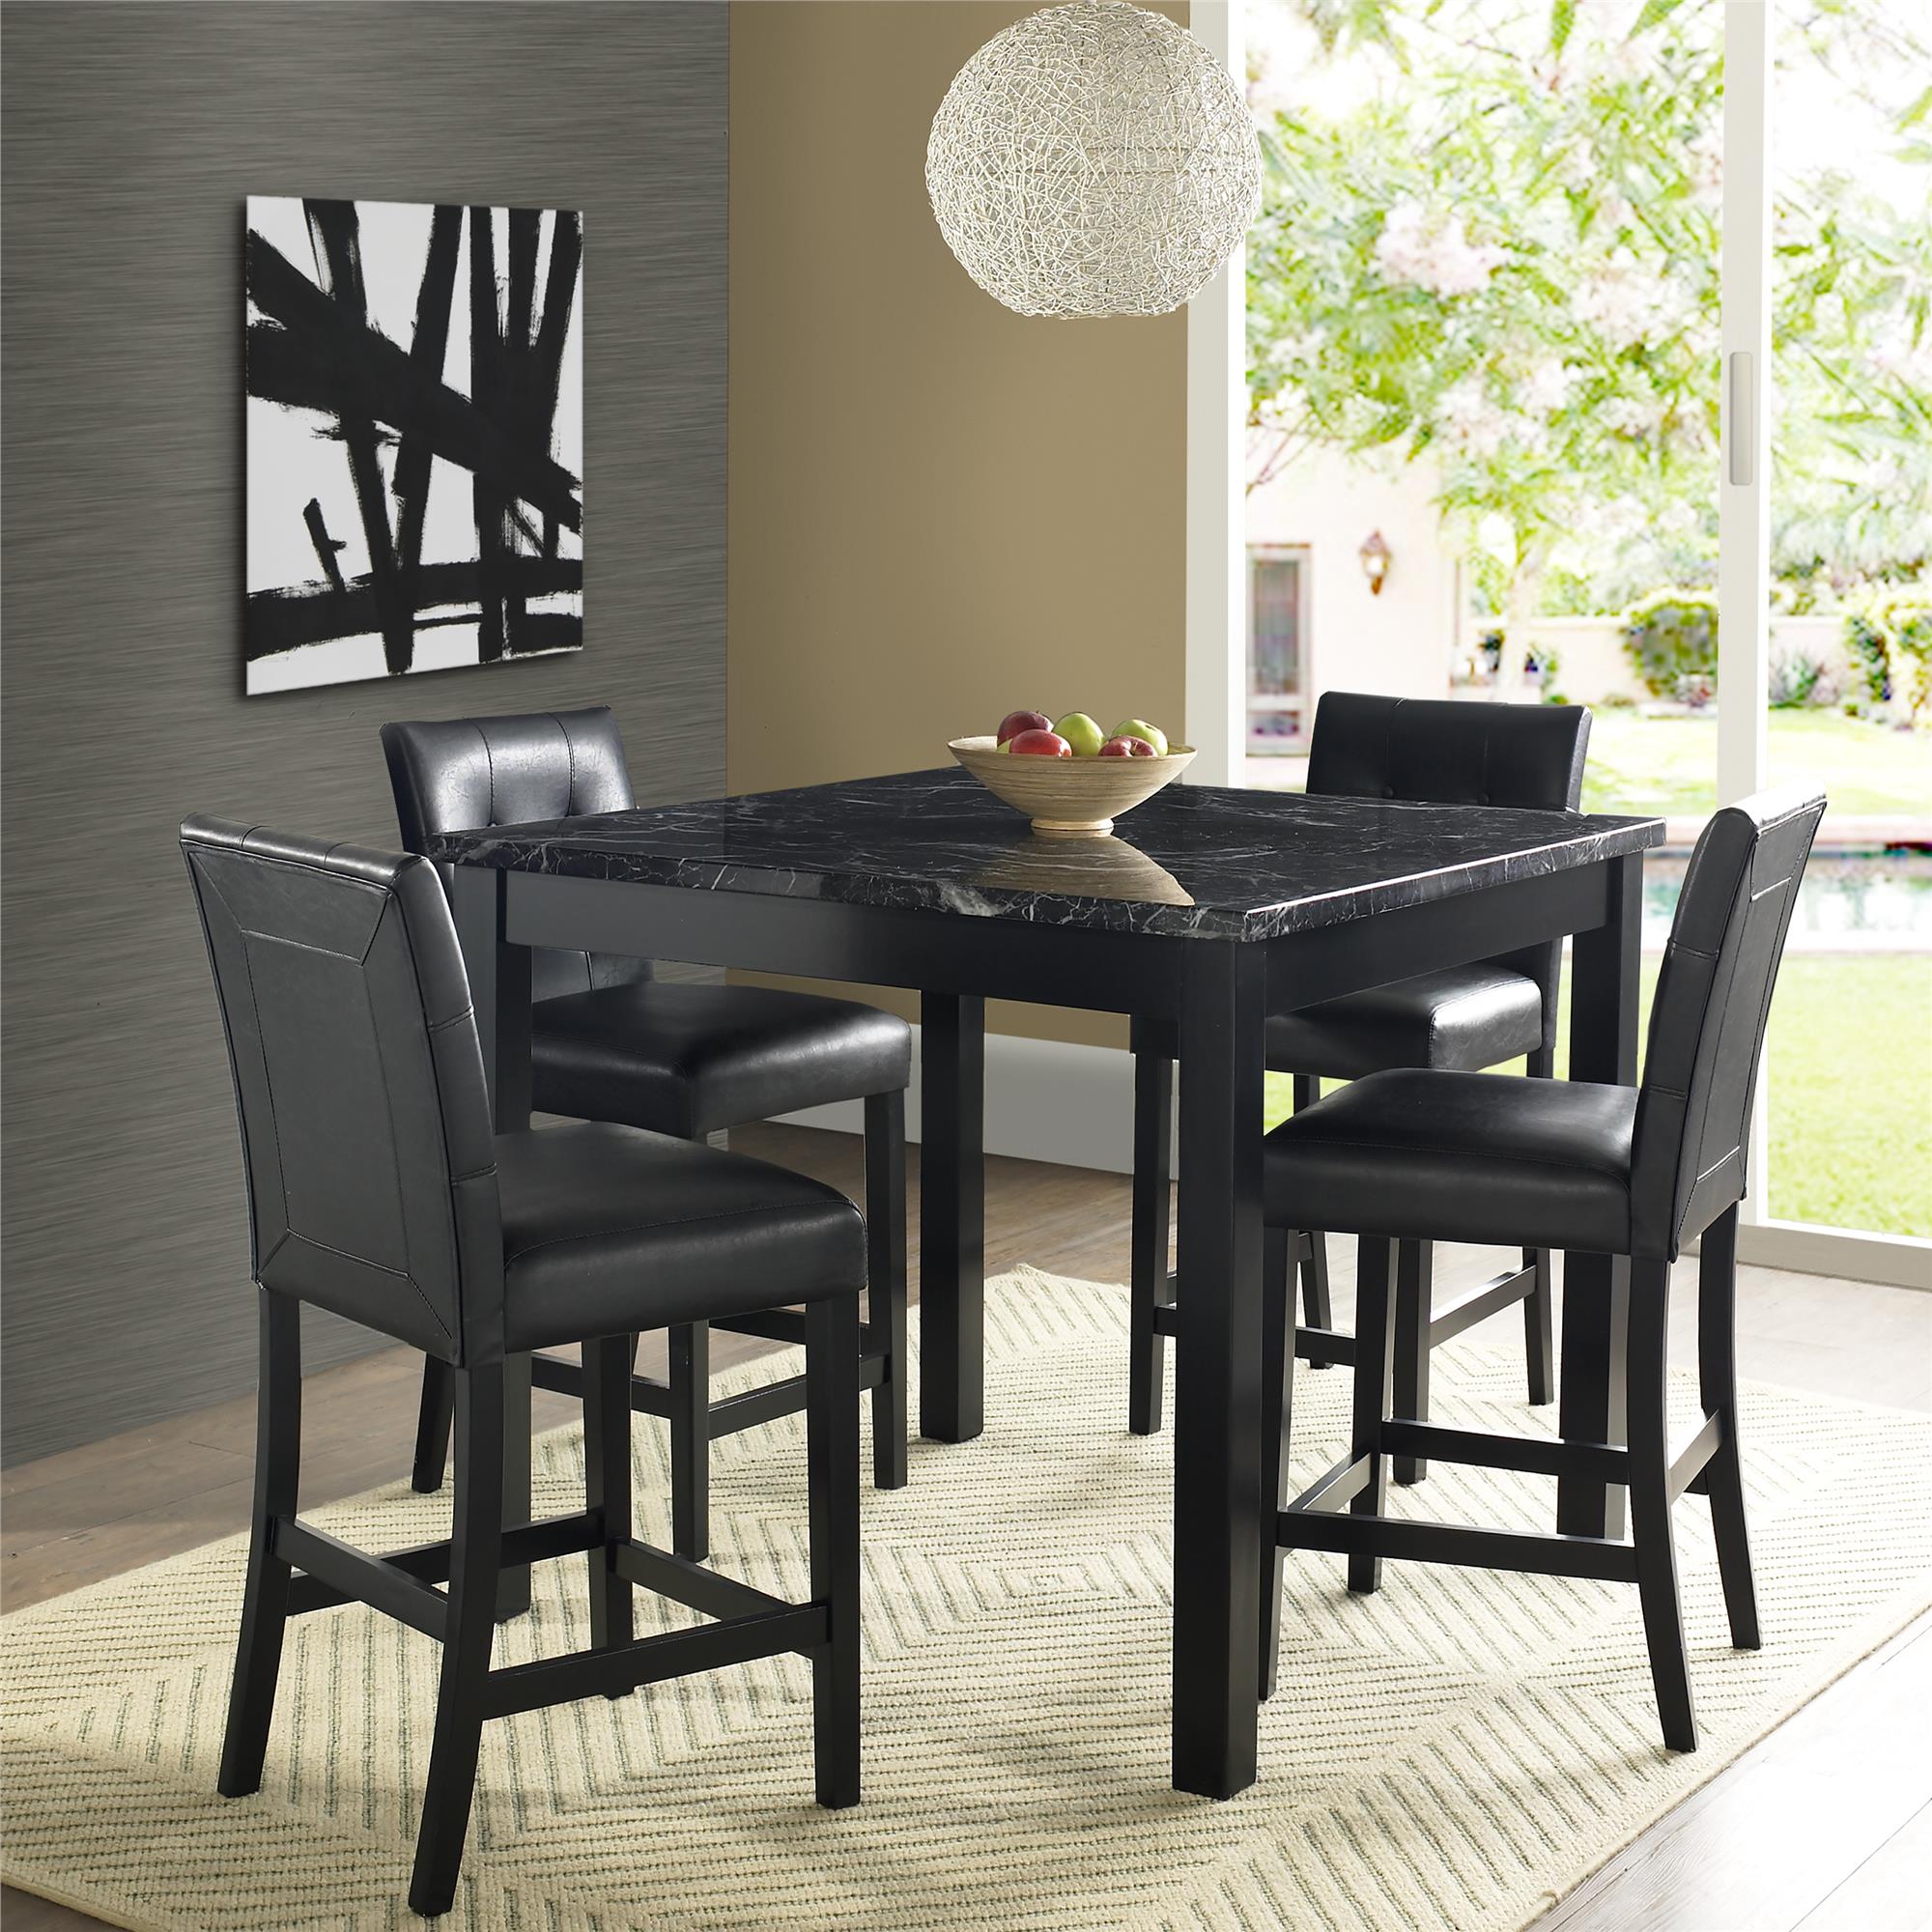 Dorel Home Furnishings Andover Faux Marble Counter Height Dining Set